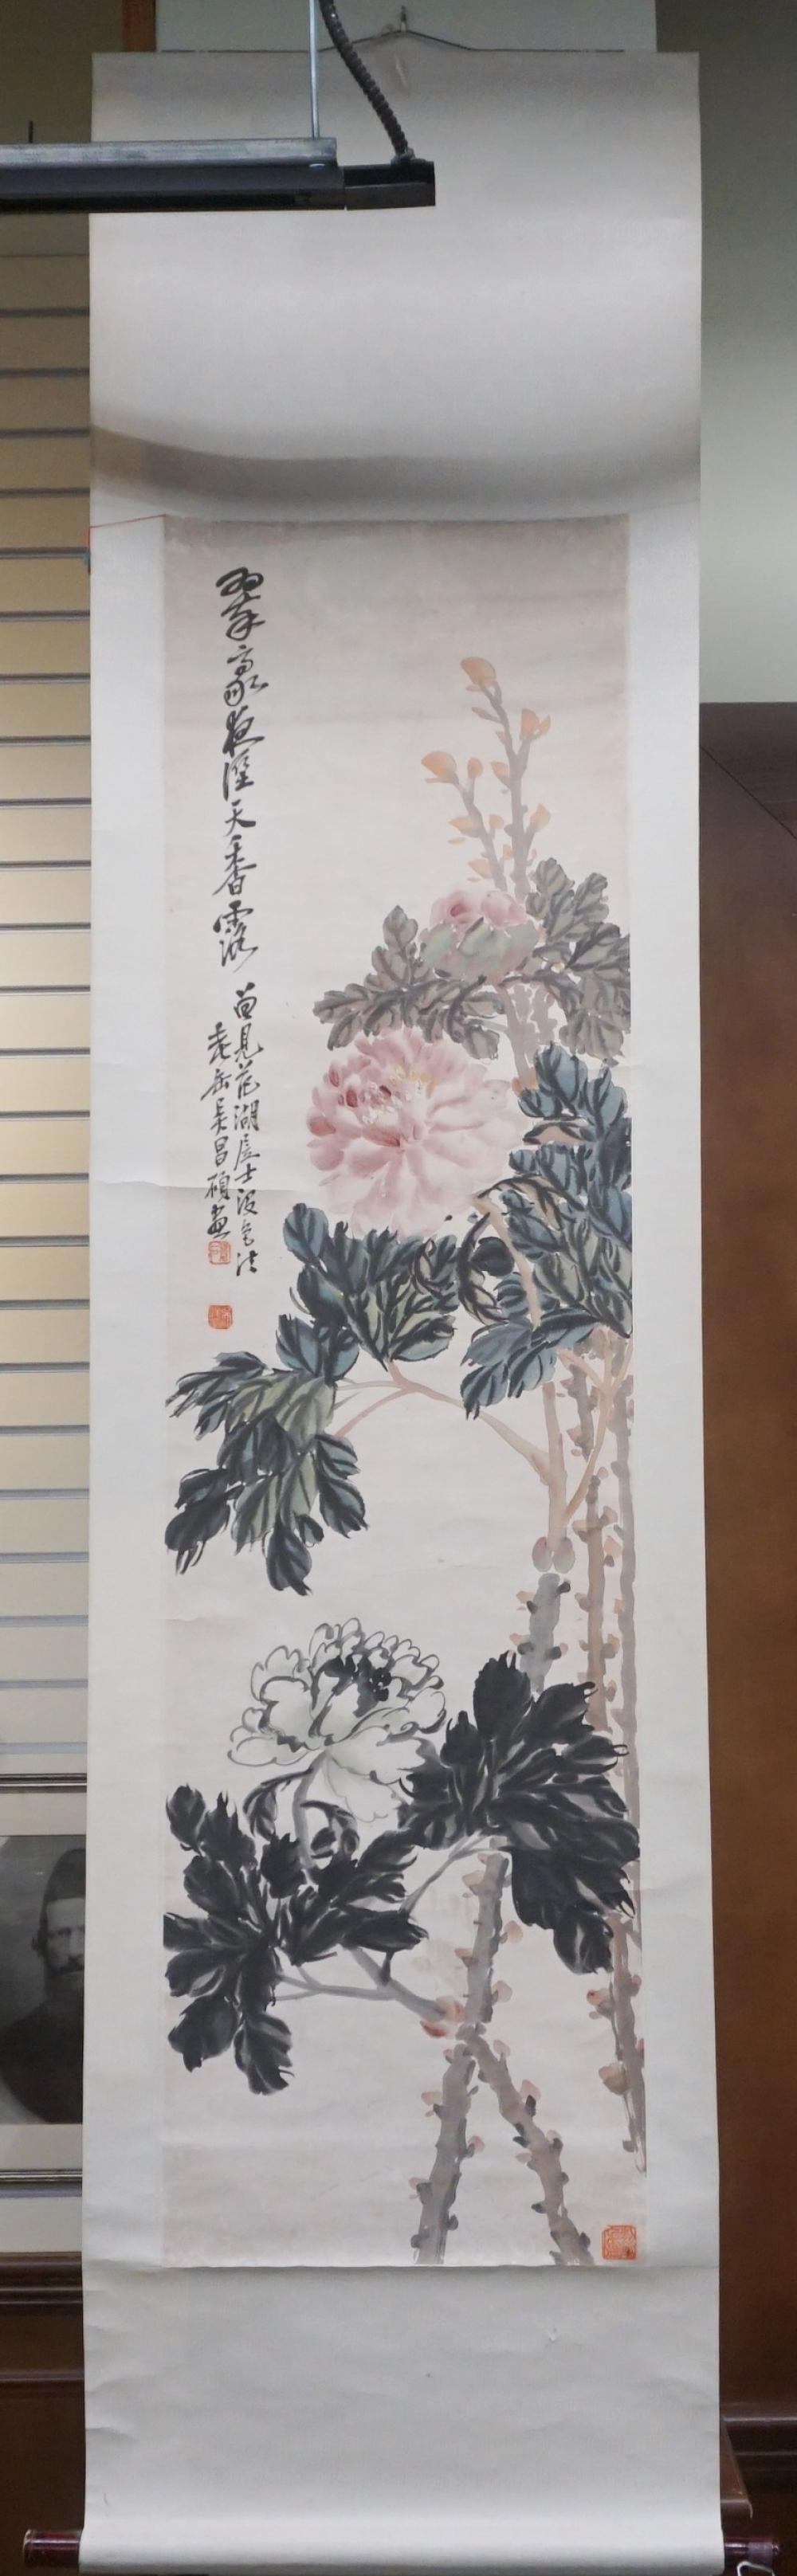 CHINESE HANGING SCROLL PAGE 57 32f3bc